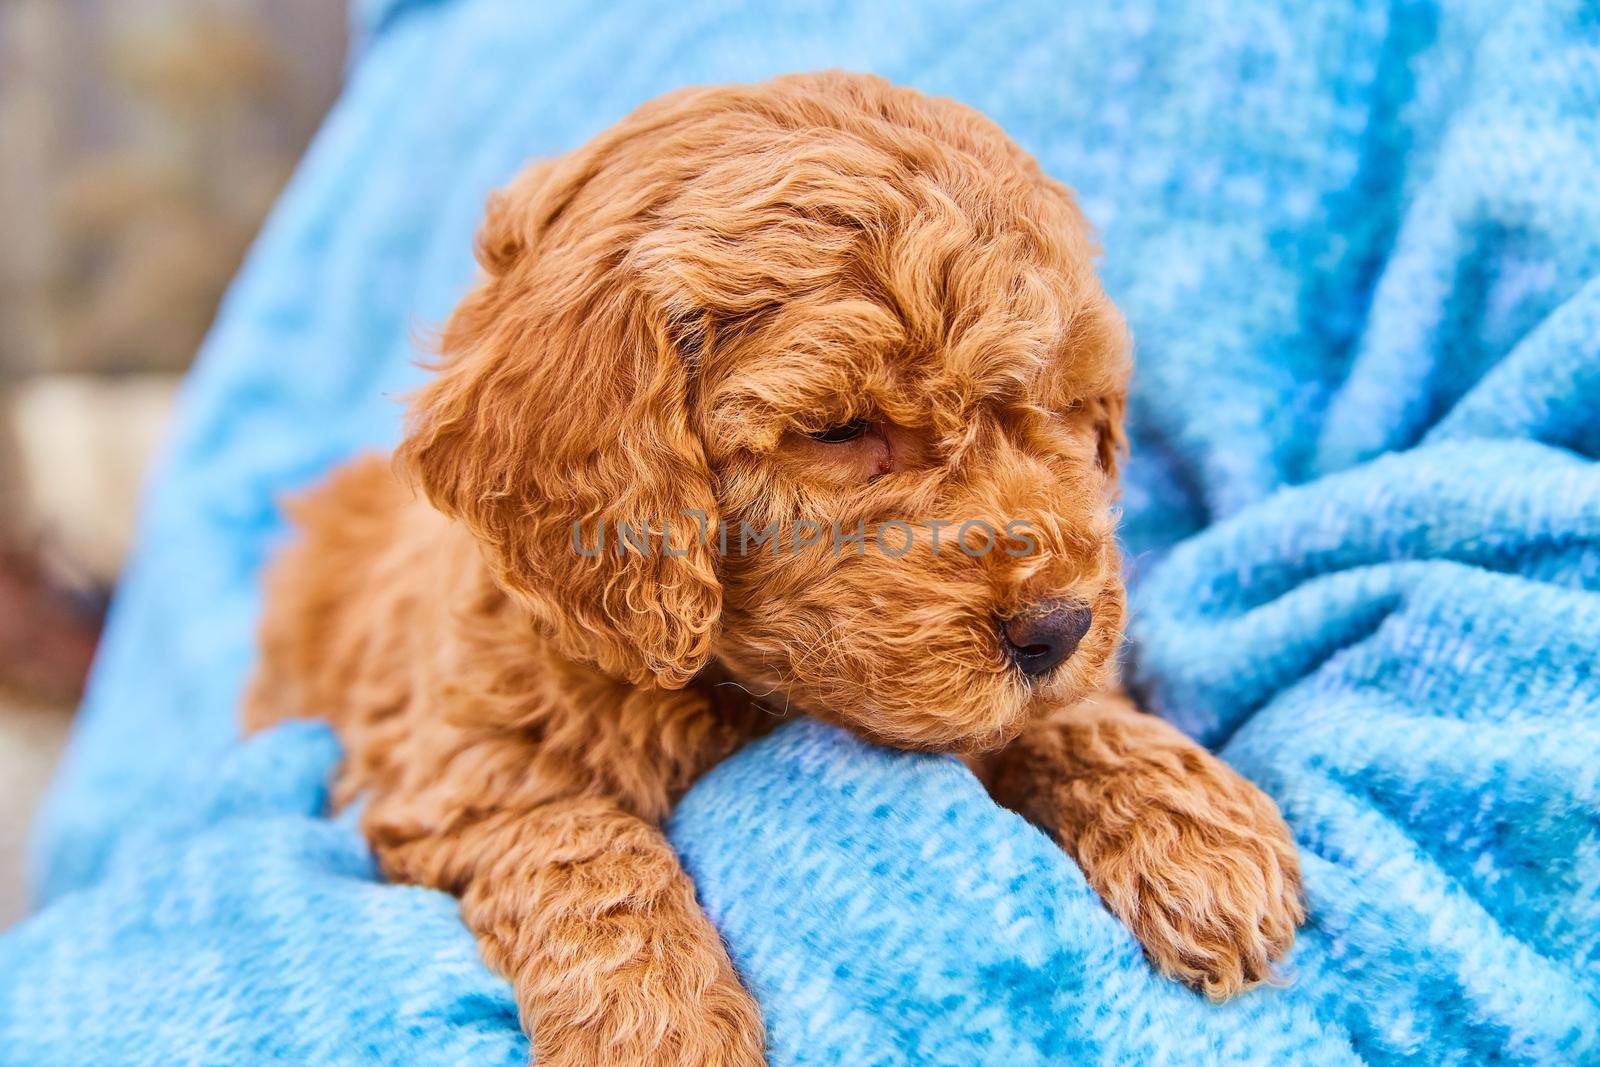 Image of Tiny curly haired goldendoodle resting in blue blanket